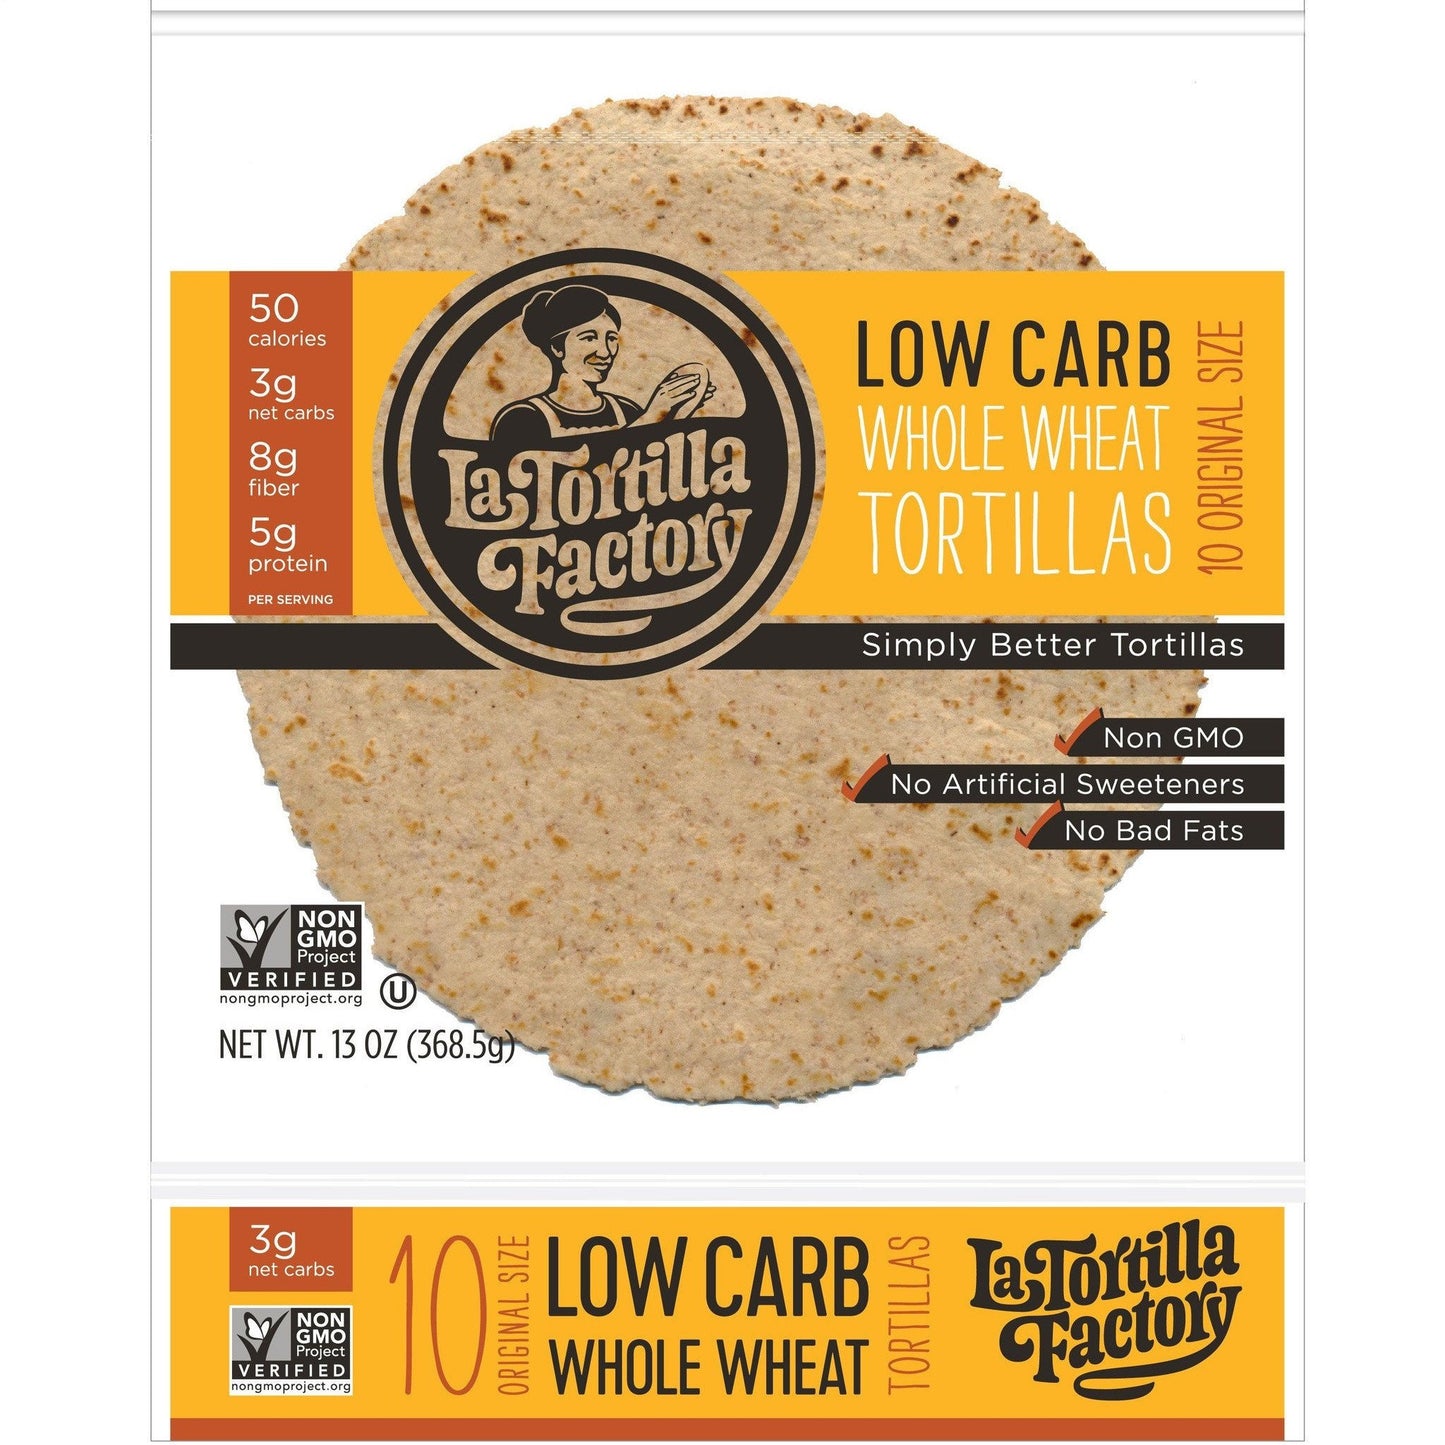 La Tortilla Factory Low Carb, High Fiber Tortillas, Made with Whole Wheat, Original Size, 10 Ea(Pack of 10)